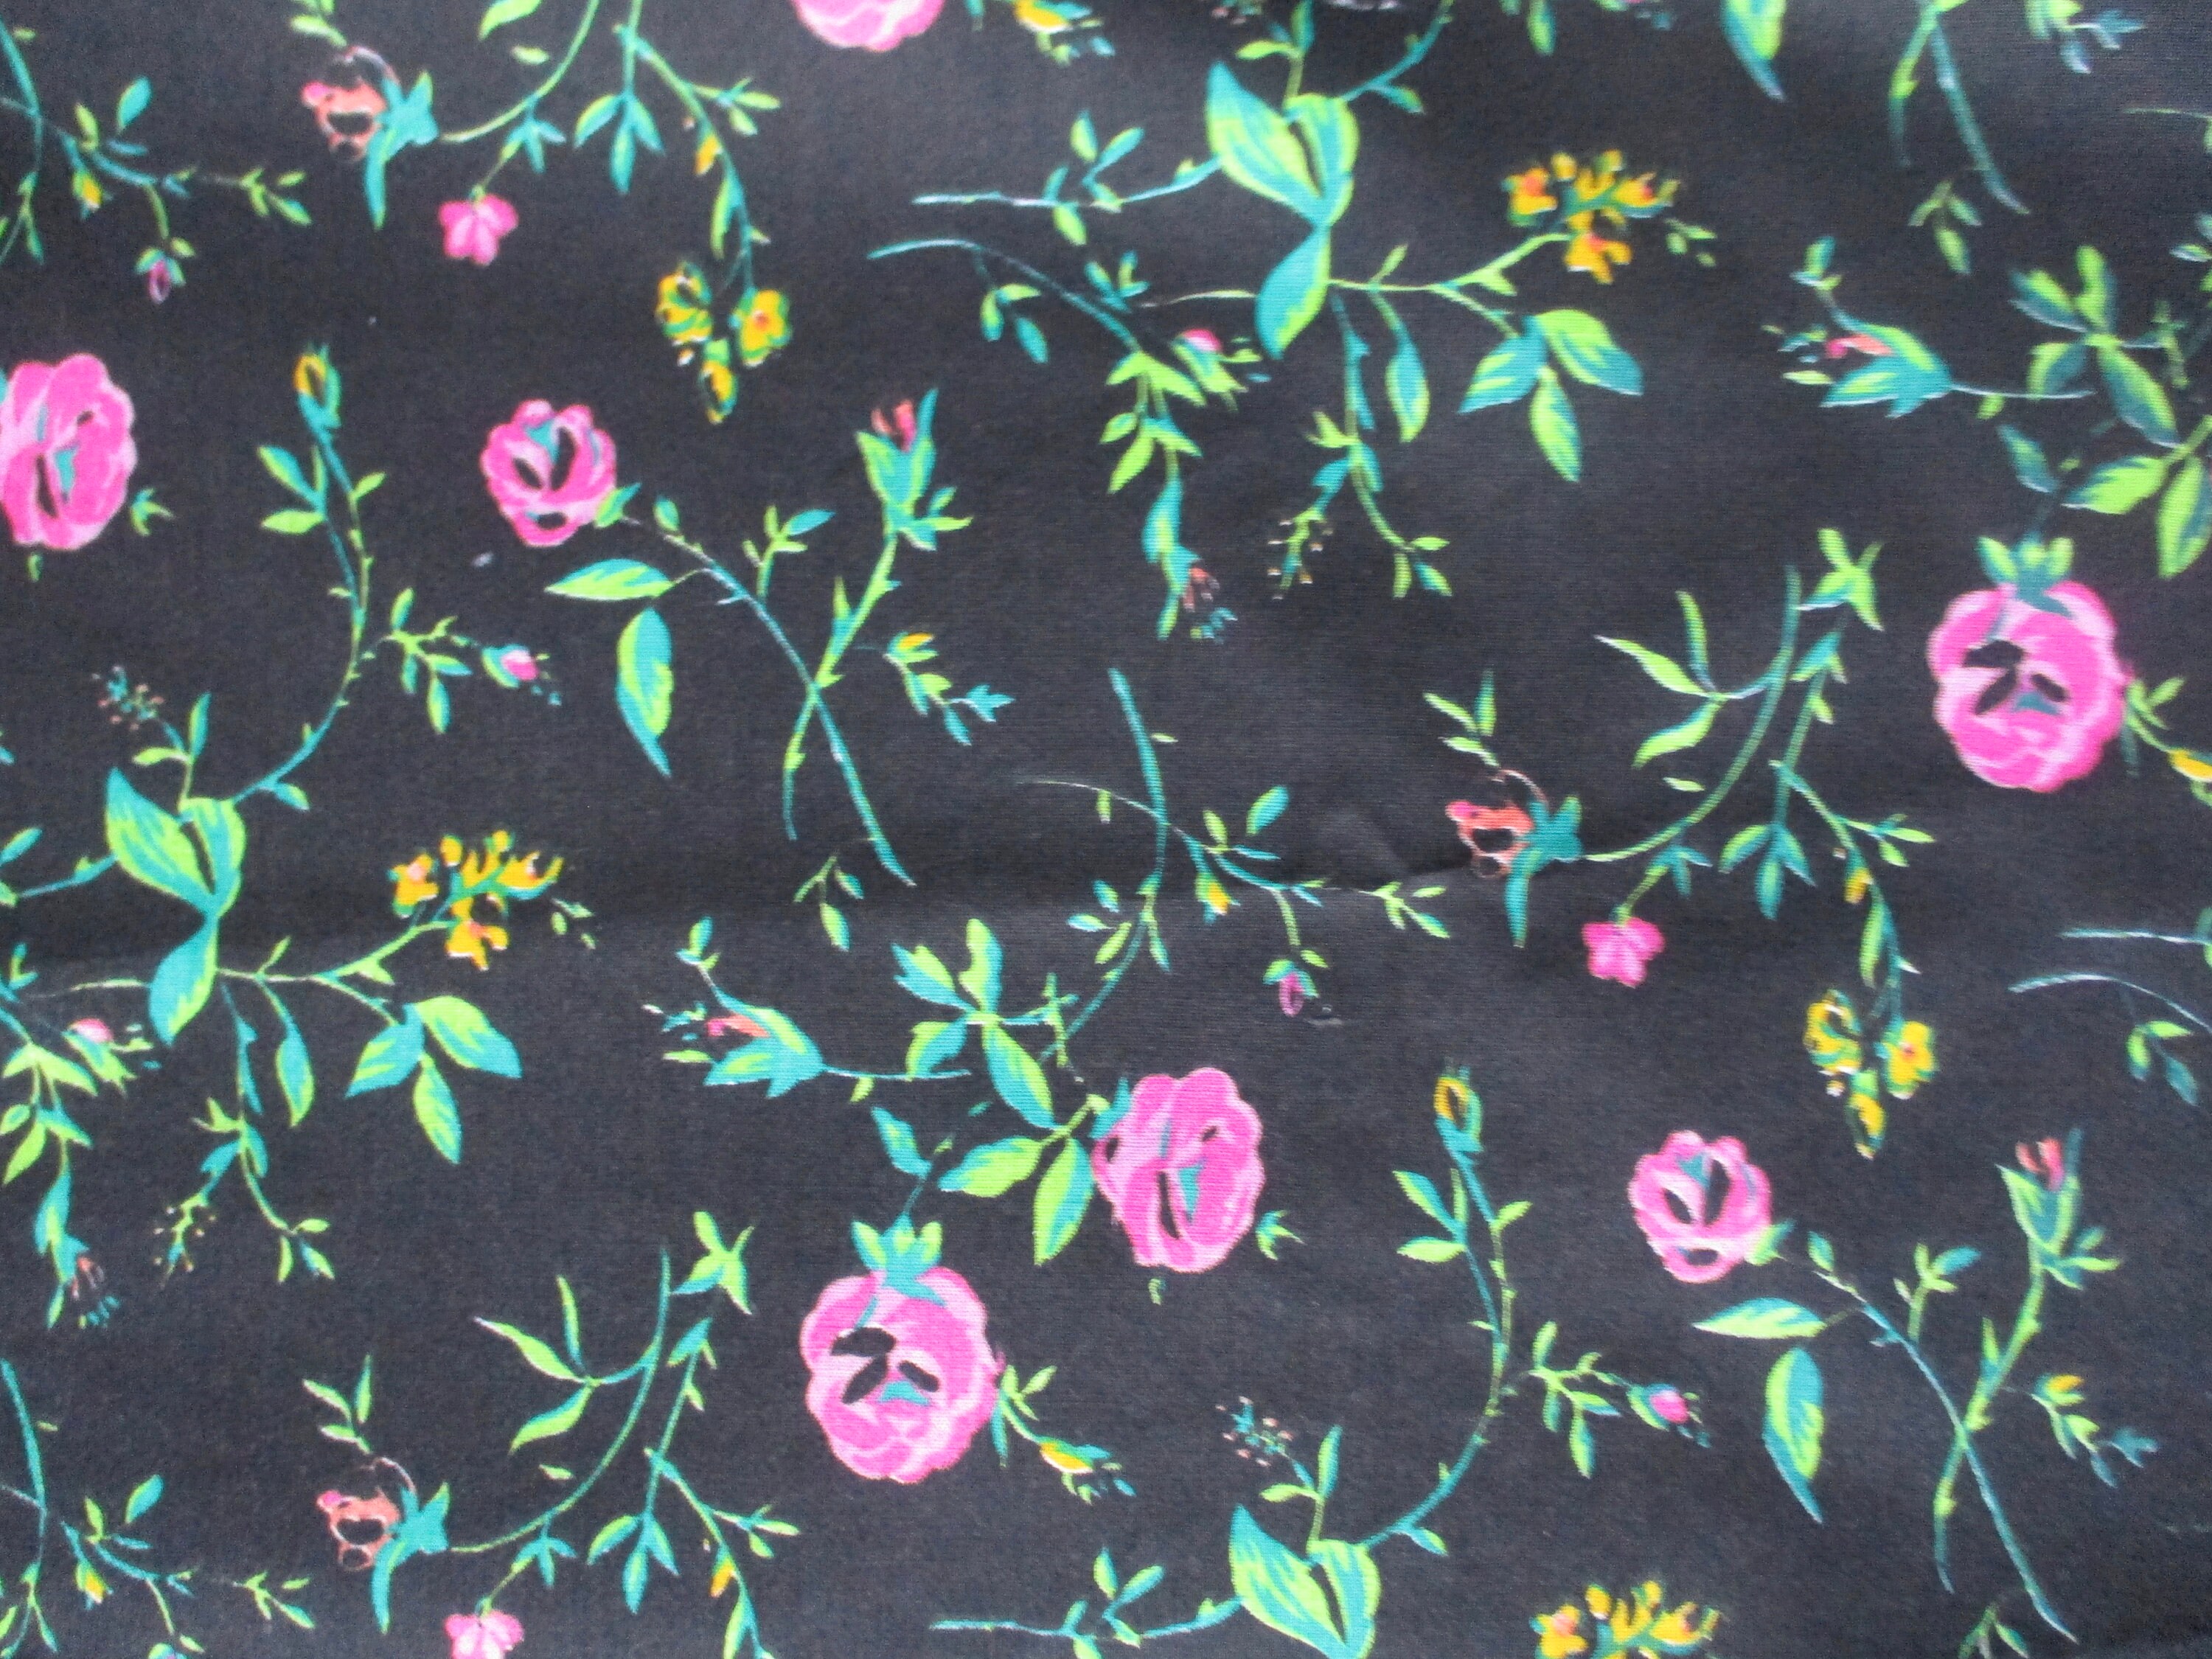 Vintage 1990s Cotton Fabric Black With Pink and Green Floral - Etsy